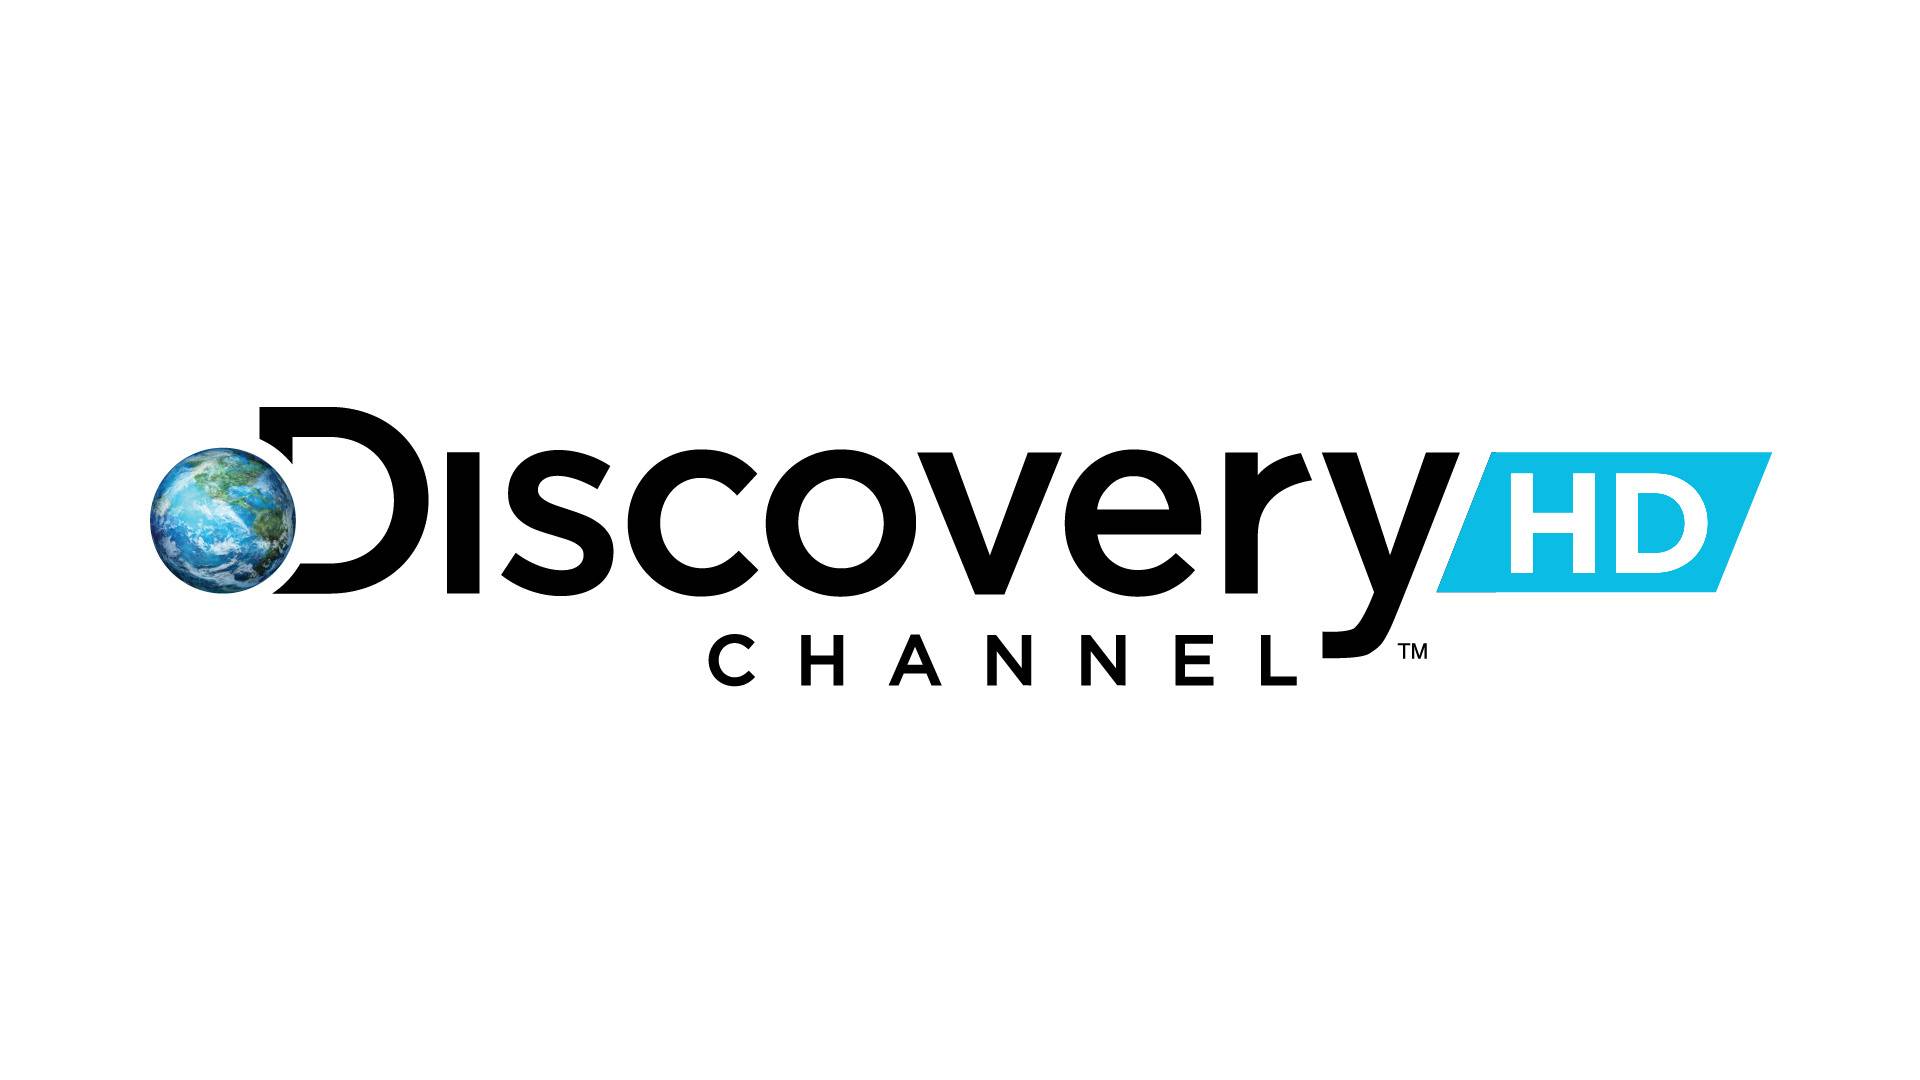 Wallpapers Discovery HD channel hi-tech on the desktop